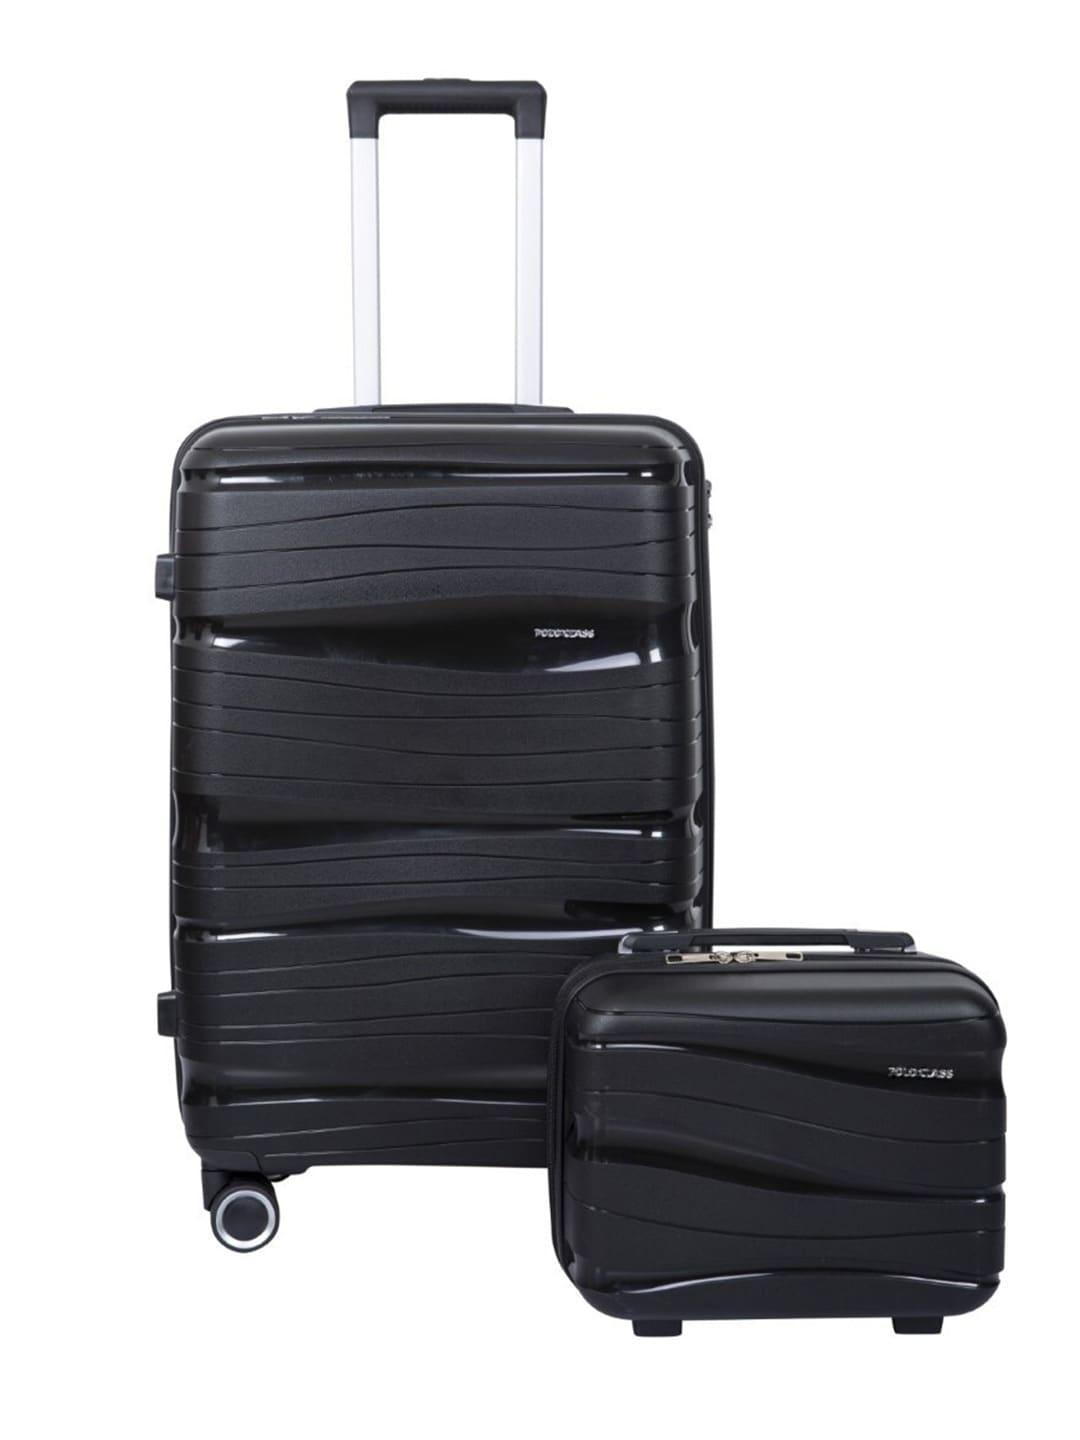 Polo Class Printed Hard-Sided Trolley Suitcases With 1 Vanity Bag